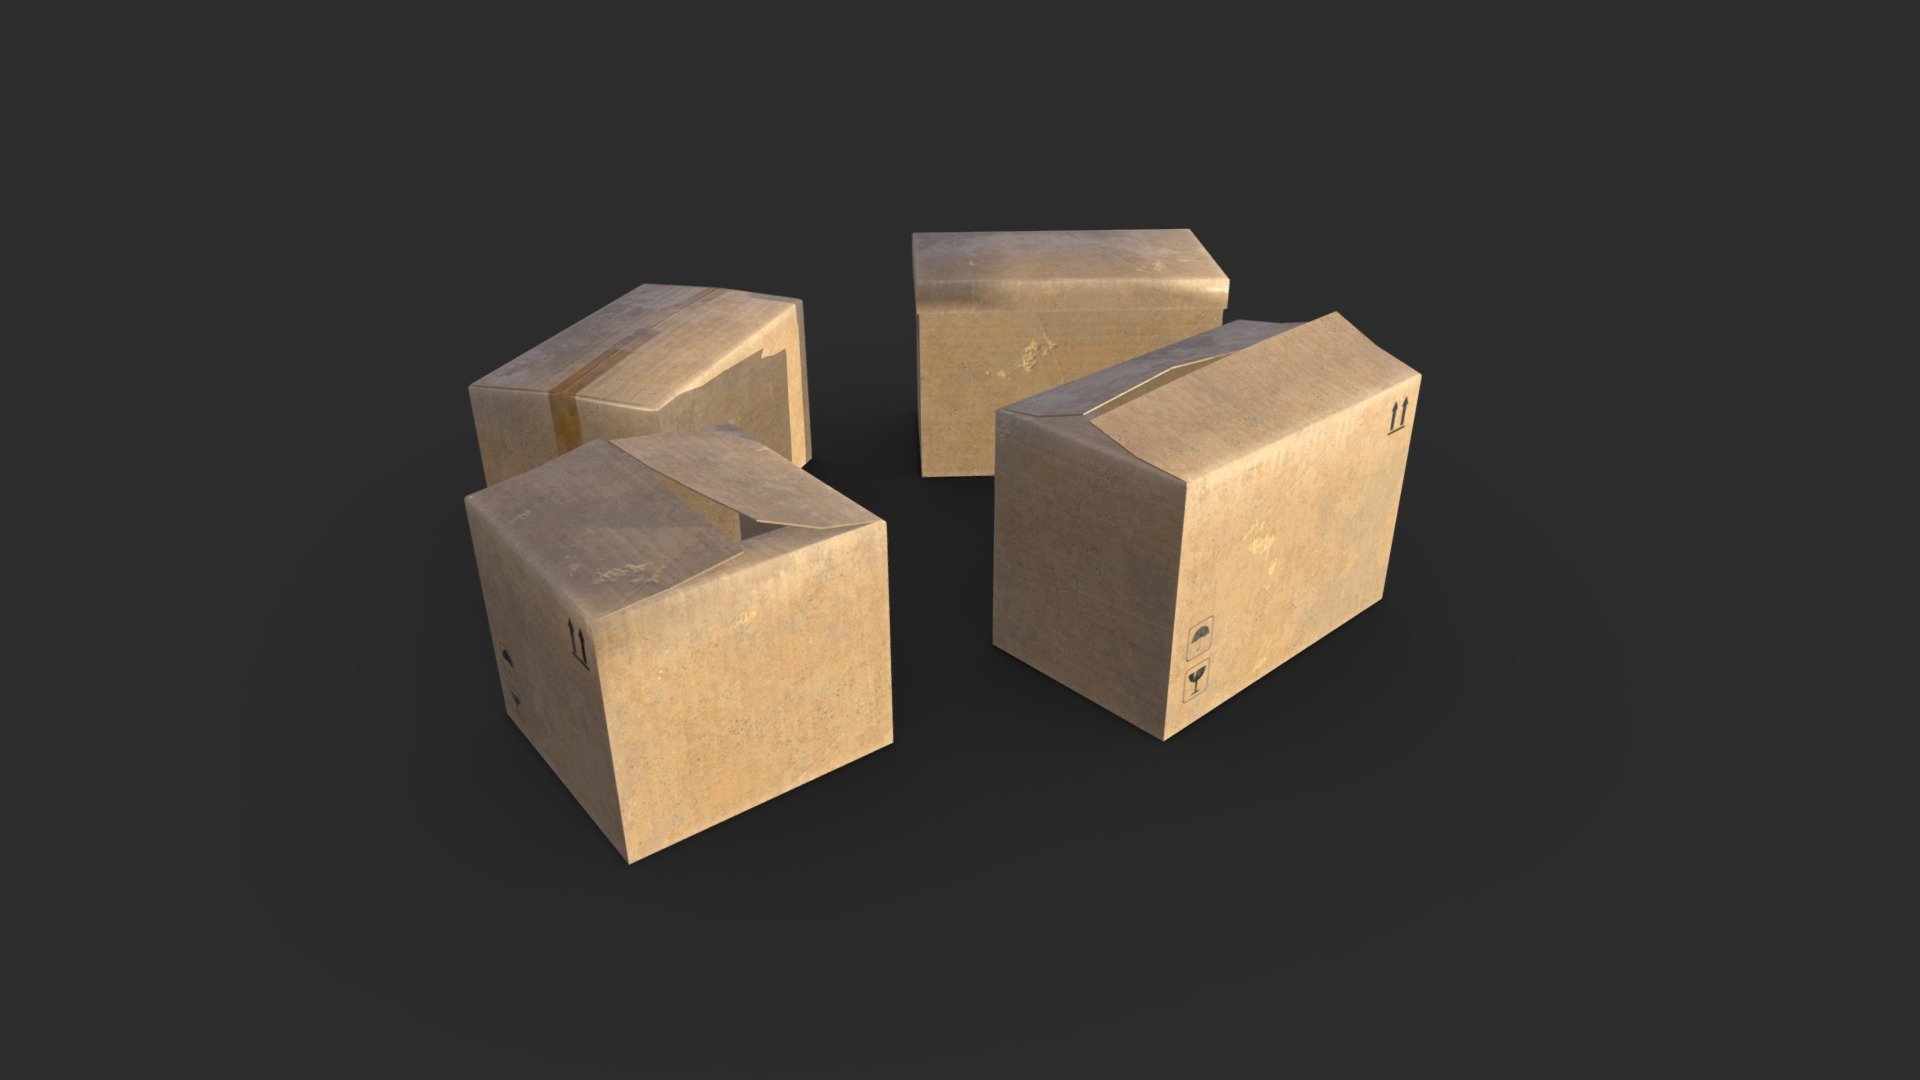 A 3D model of 4 cardboard boxes. All of the 4 boxes share the same material and textures and have 2 LODs for the mesh to be ready for game using.

The 3D model is ready for game and low poly using. All materials are ready for PBR rendering.

Originally created with Blender 2.79b

Low poly model

SPECIFICATIONS

Objects : 8 
Polygons : 386 
LOD : 2 
Subdivision ready : No 
Render engine : Cycles render or Eevee

Box 1 (LOD0/LOD1) 
Polygons : 42 / 12 
Vertices : 44 / 10

Box 2 &amp; Box 3 (LOD0/LOD1) 
Polygons : 146 / 11 
Vertices : 148 / 20

Box 4 (LOD0/LOD1) 
Polygons : 52 / 12 
Vertices : 54 / 10

TEXTURES

Materials in scene : 1 
Textures sizes (4K / 2K / 1K) 
Textures types : Diffuse, Metallic, Roughness, Normal, Heigh and AO 
Textures format : PNG

GENERAL

Real scale : Yes Scene objects are organized by groups

ADDITIONAL NOTES

File formats do not include textures. All textures are in a specific folder named &lsquo;Textures' - Cardboxes - Buy Royalty Free 3D model by KangaroOz 3D (@KangaroOz-3D) 3d model